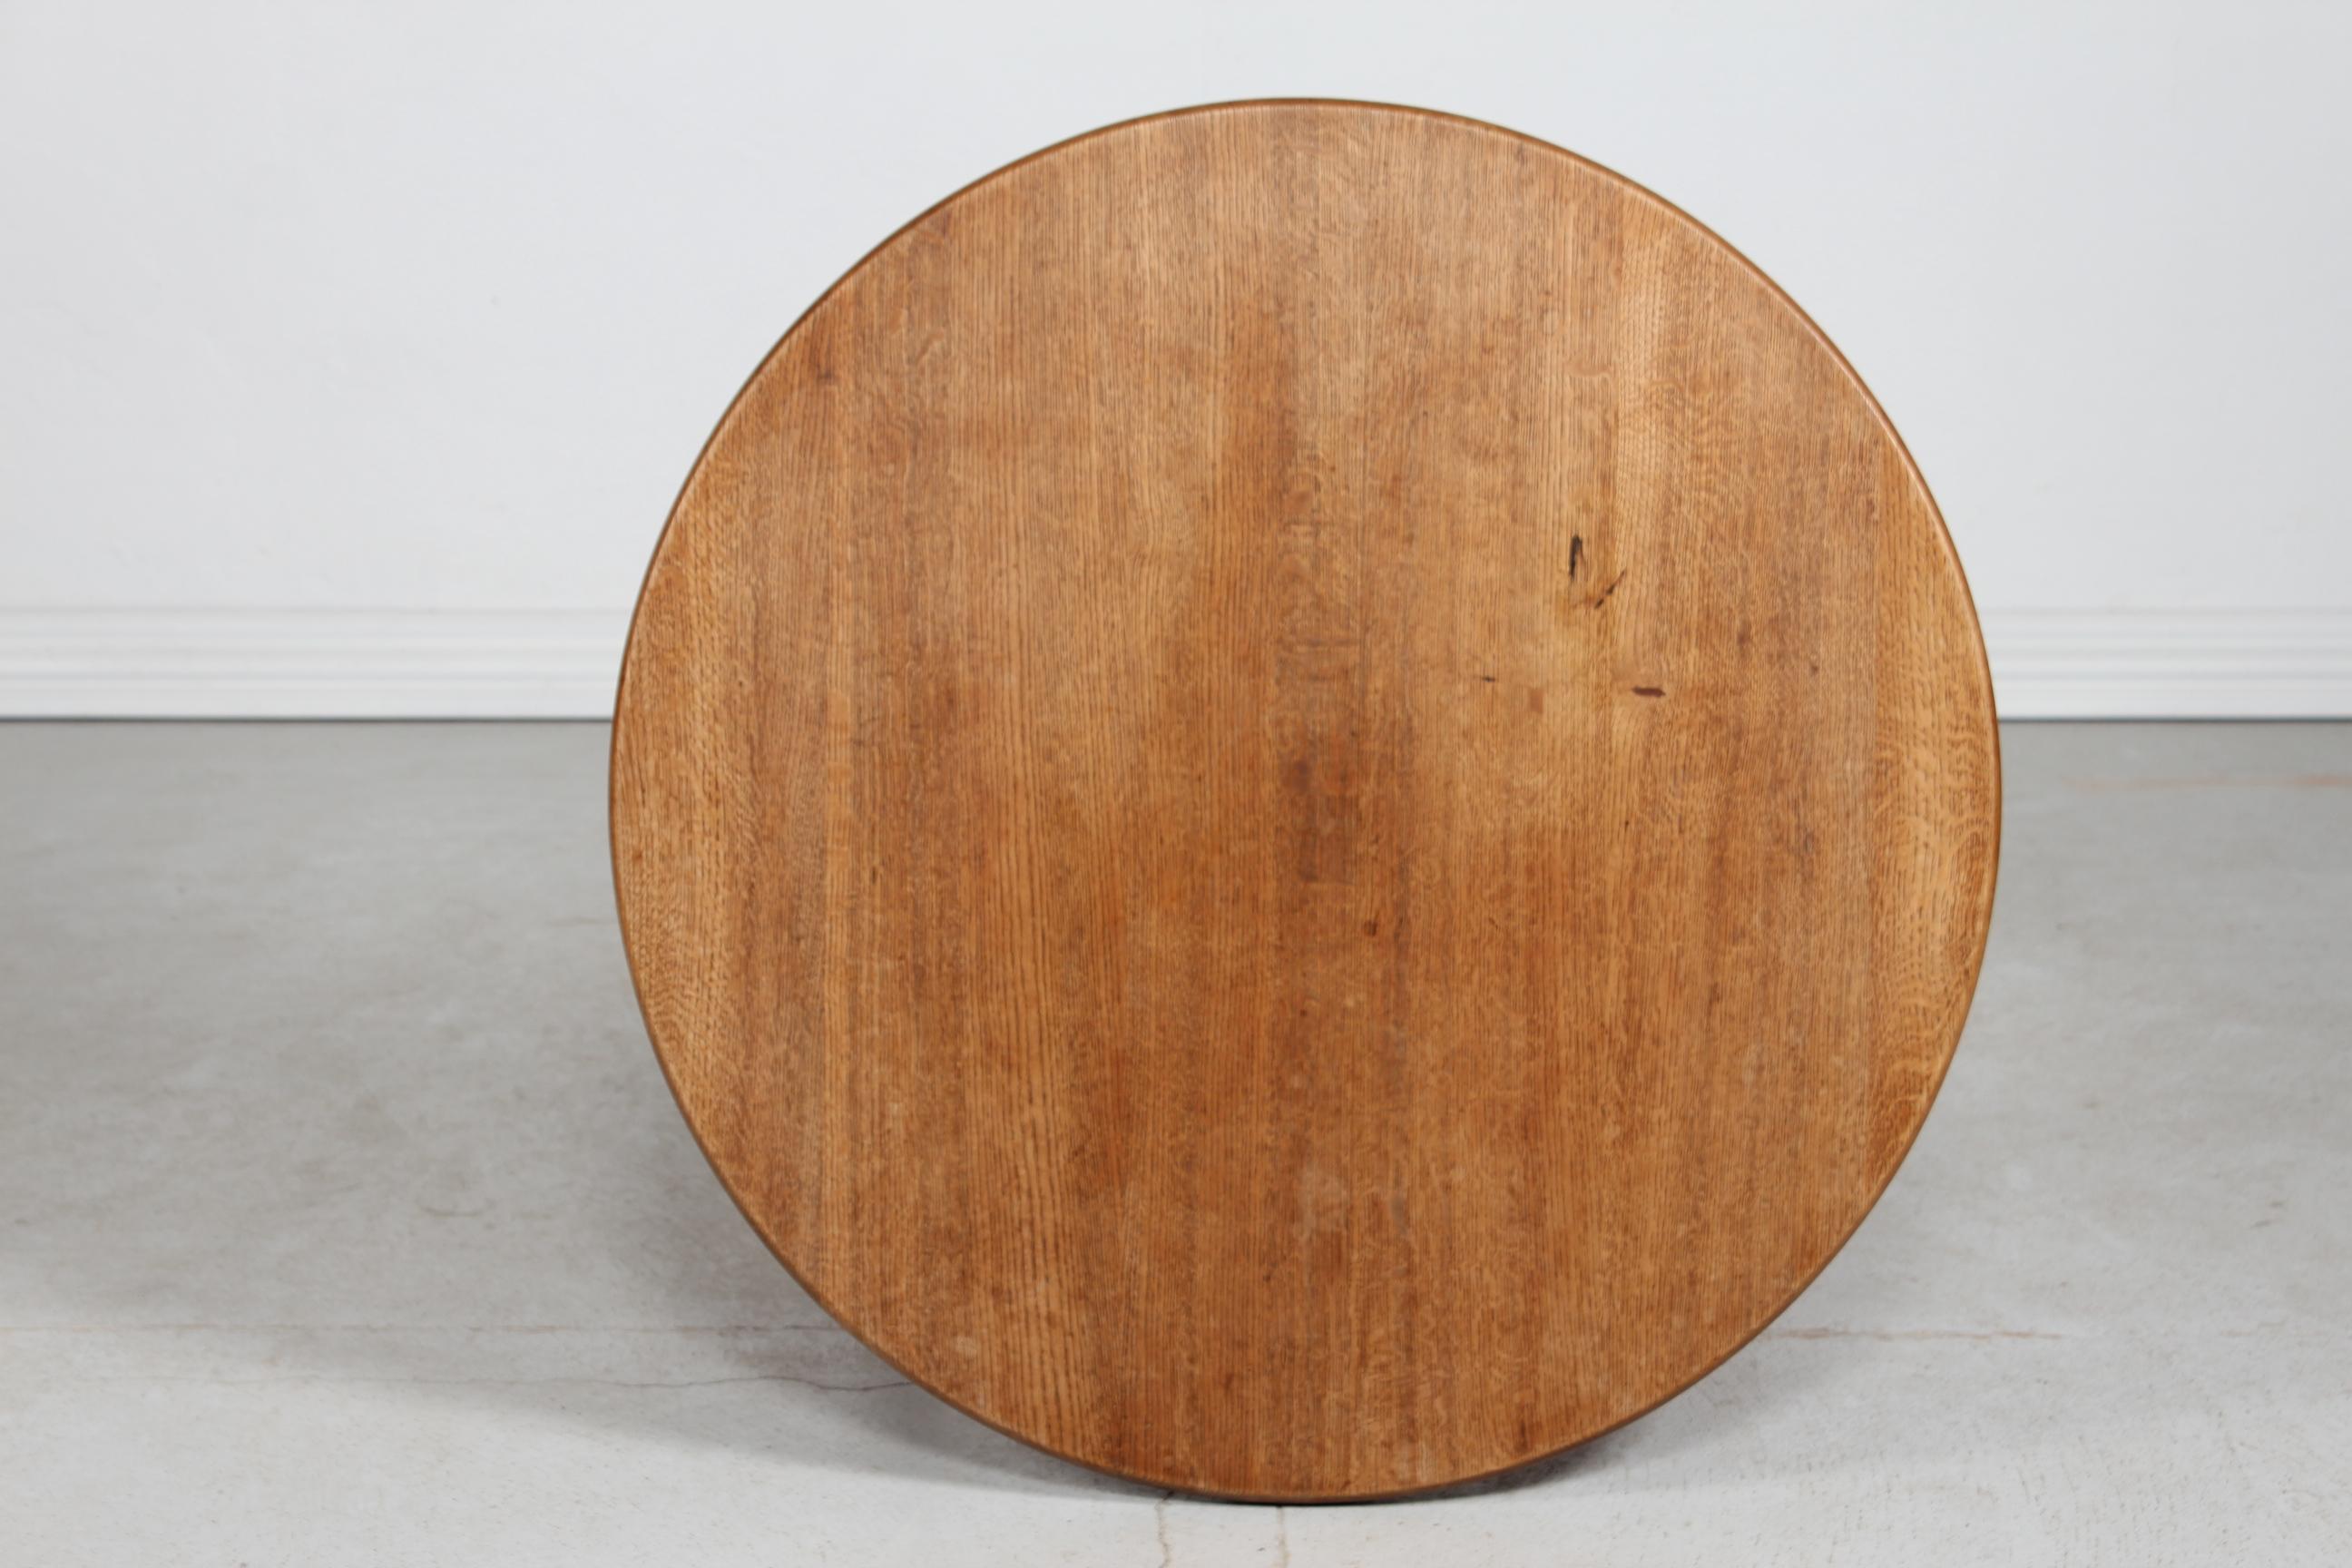 Mid-20th Century Brutalist Round Coffee Table of Solid Oak in Axel Einar Hjorth Style 1950s For Sale